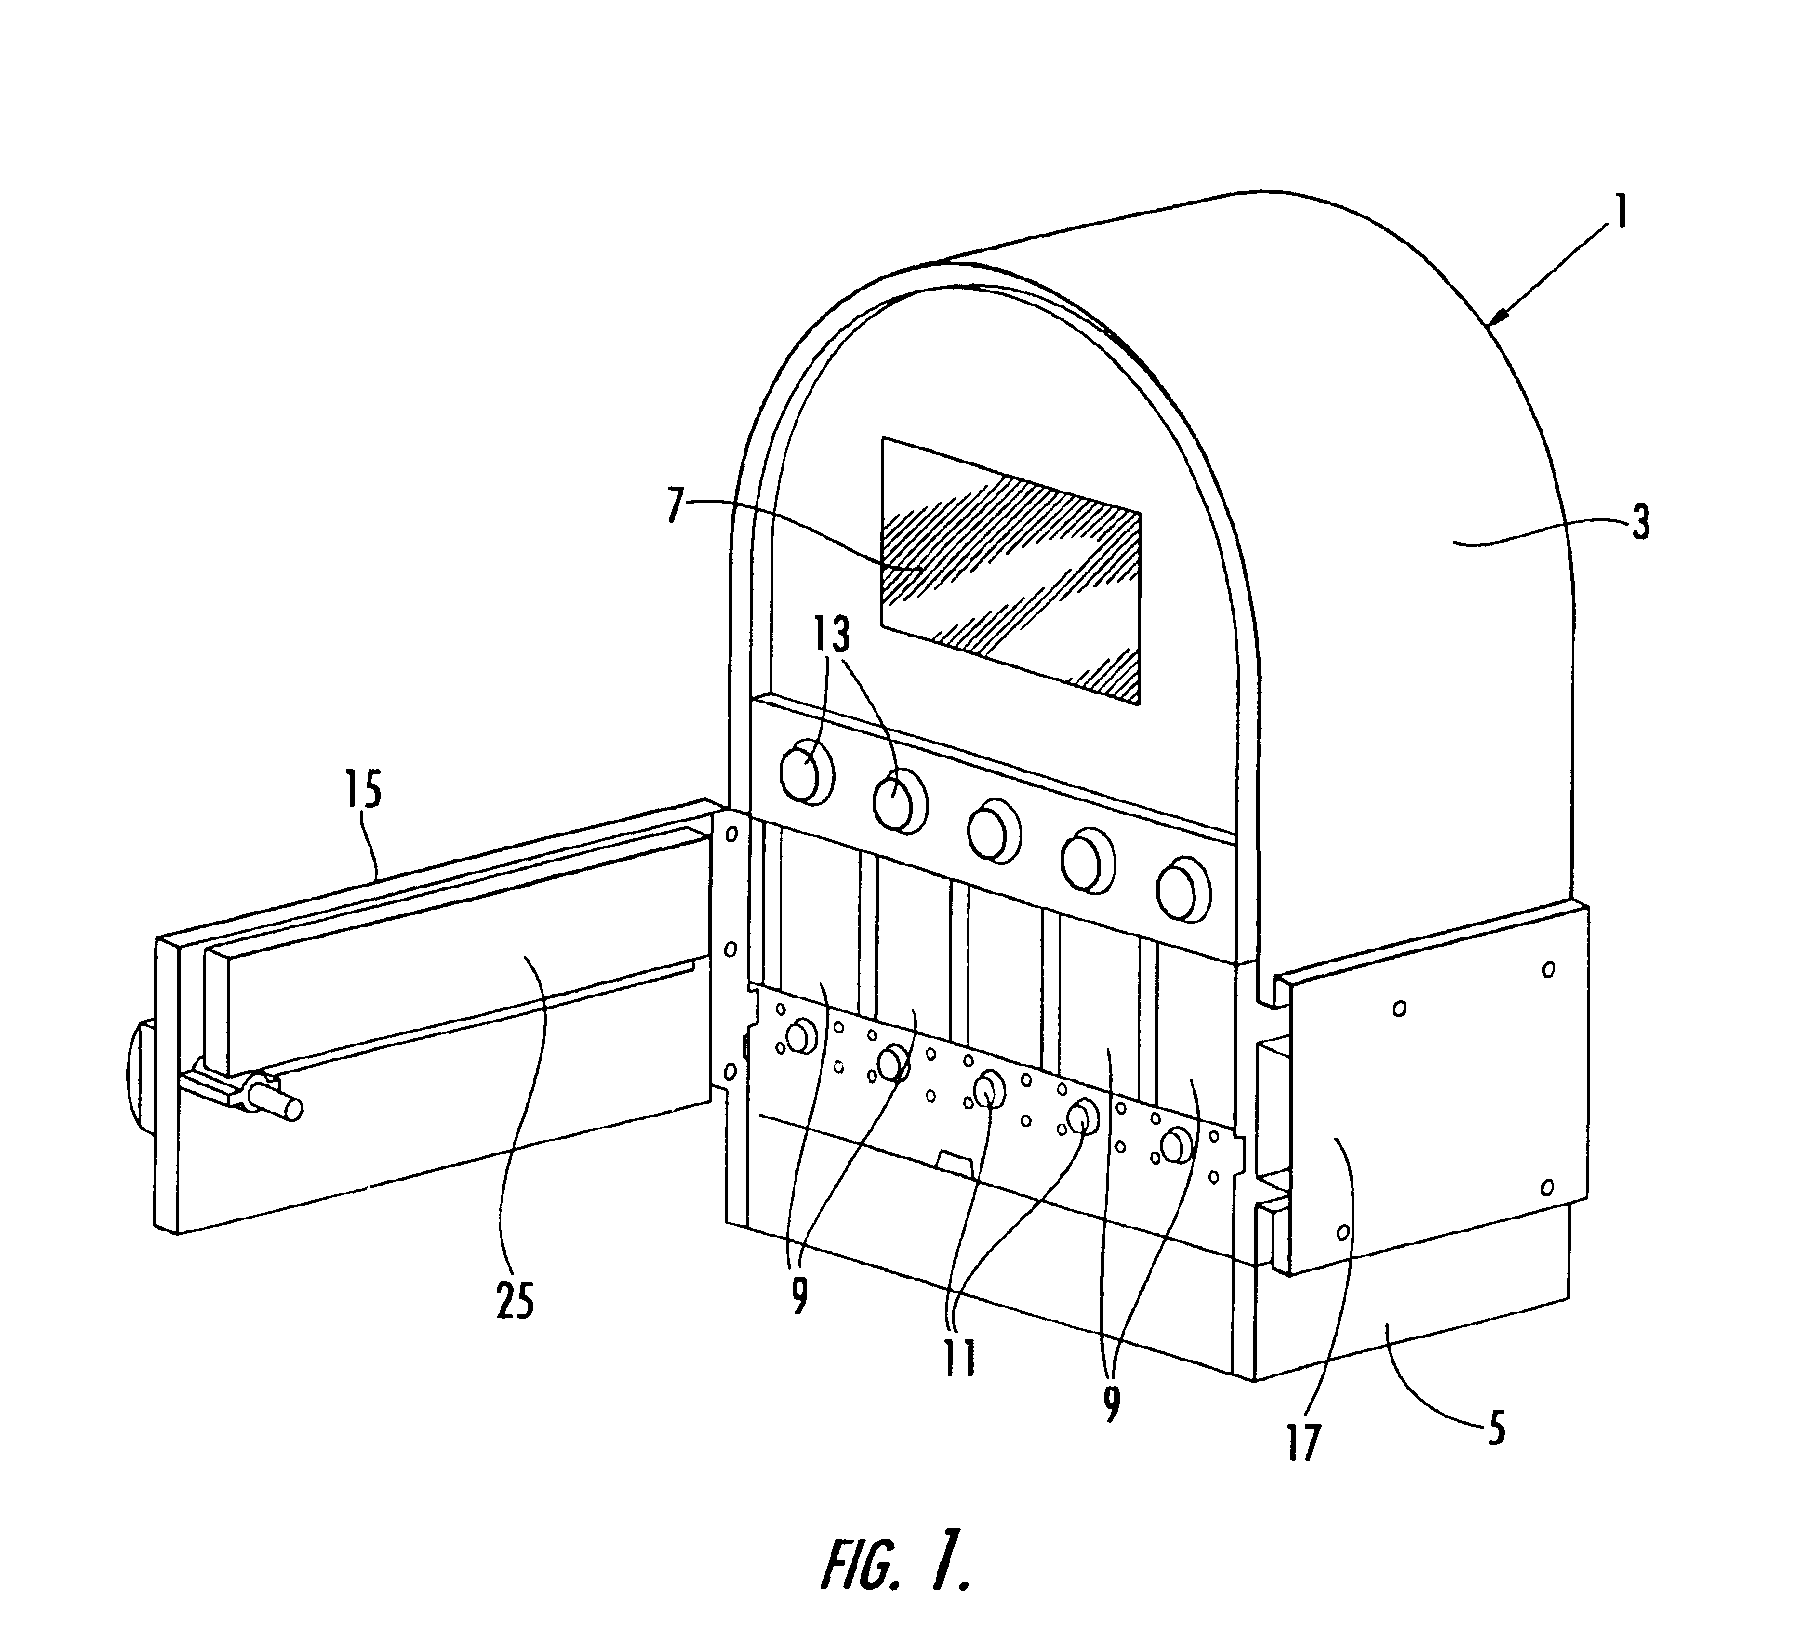 Apparatus and method for dispensing prizes